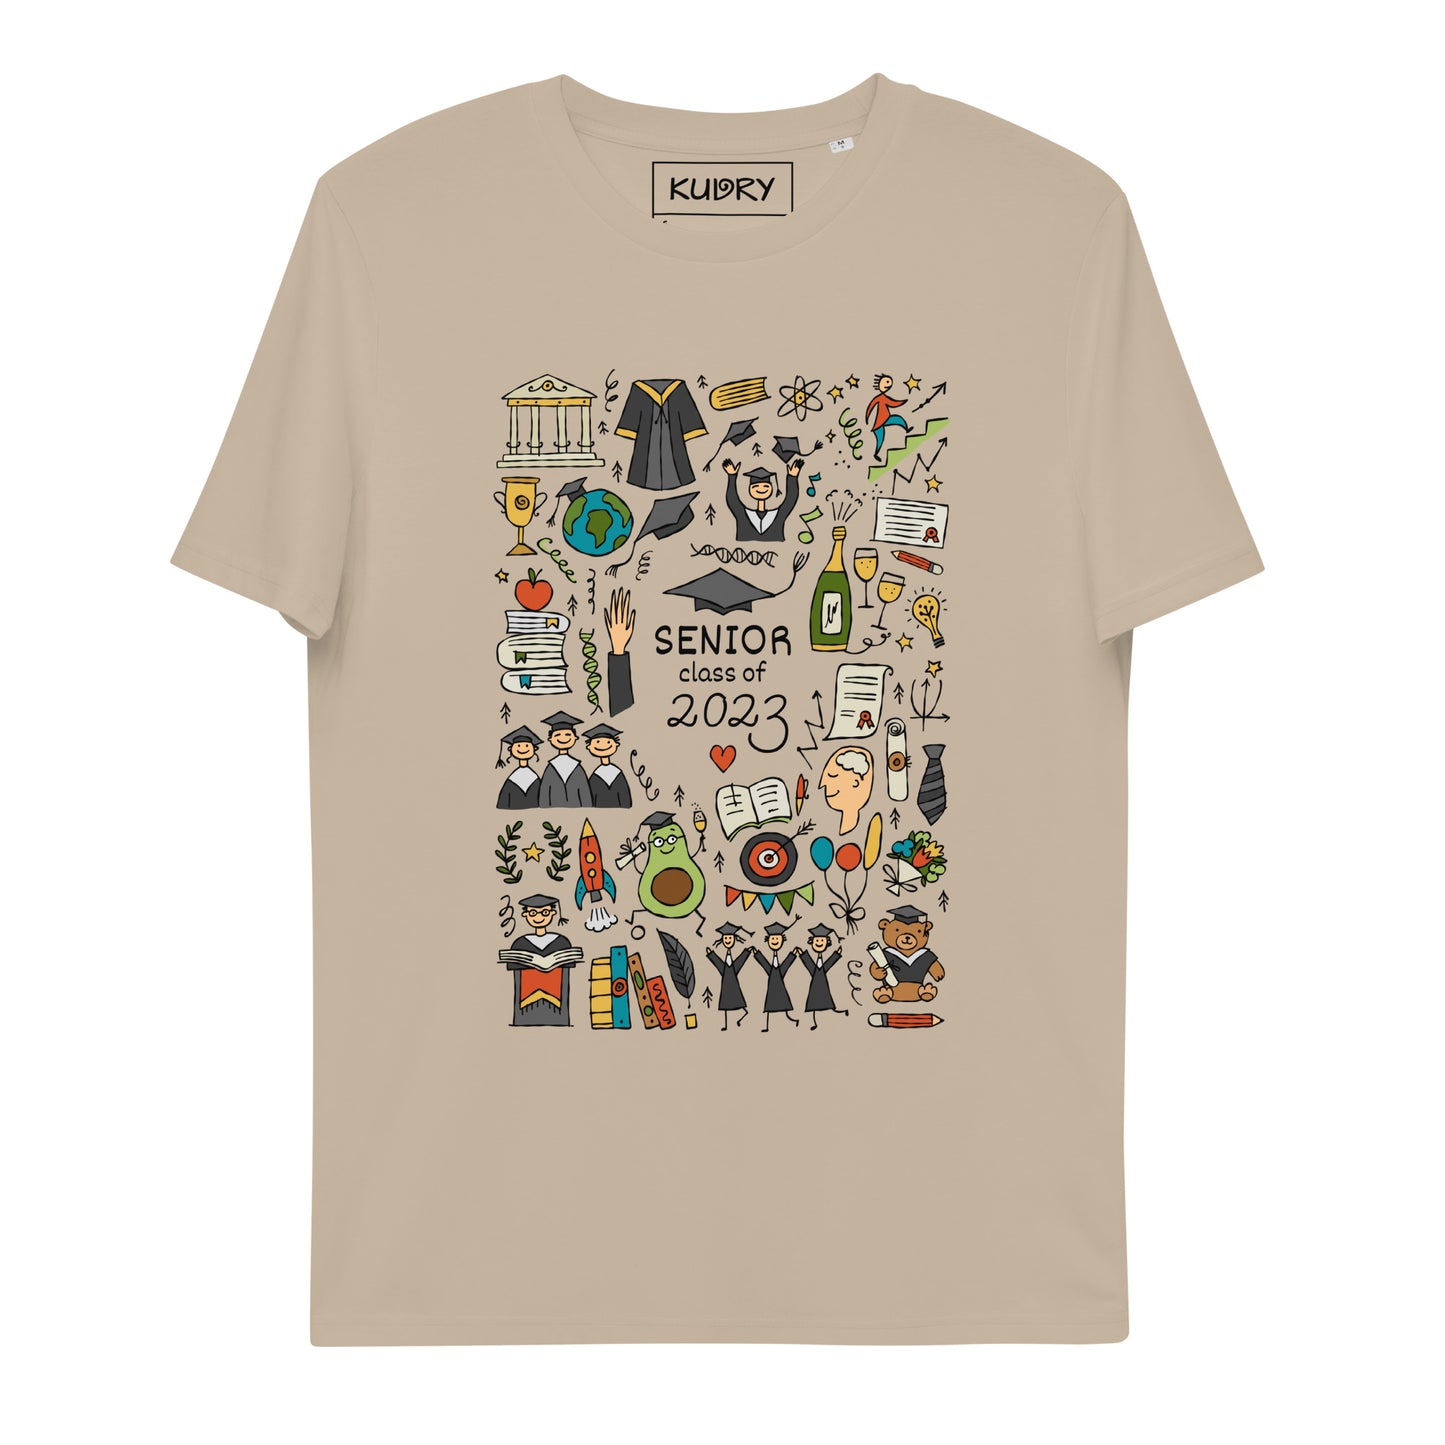 Personalised graduation 2023 beige t-shirt with funny designer print featuring graduates in hats and mantles, holiday-themed motifs, and a graduation teddy bear.